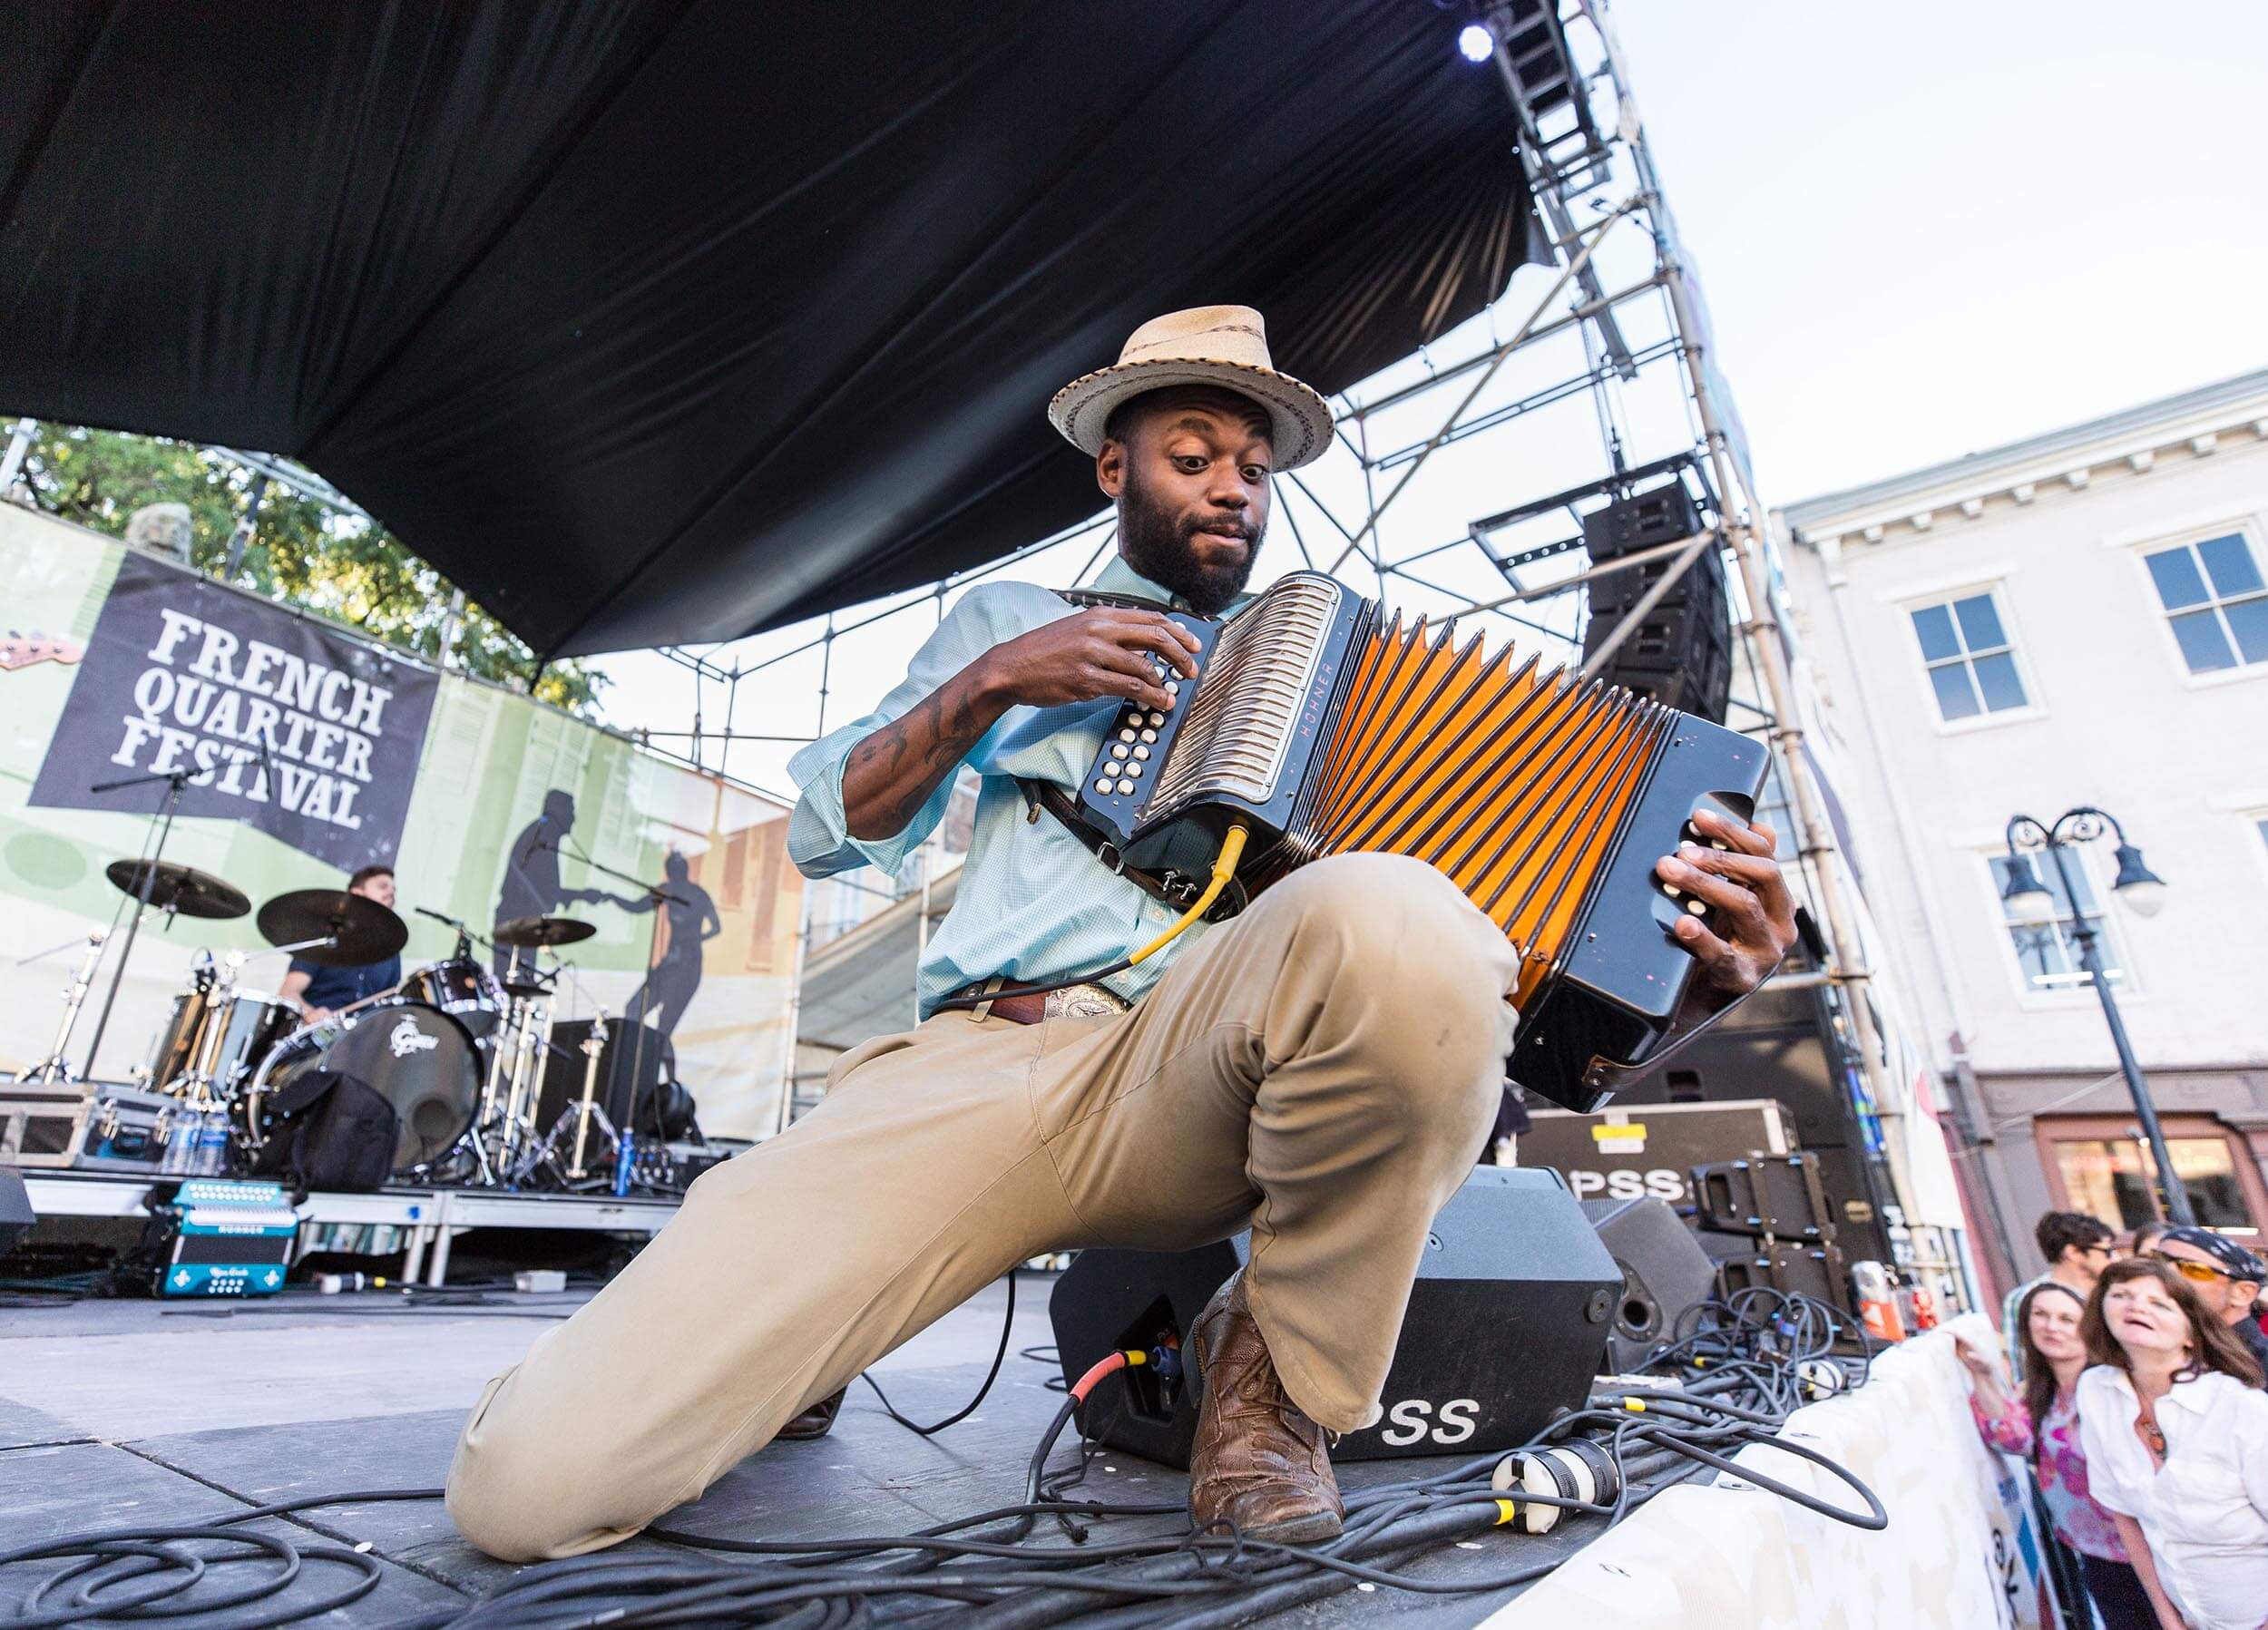 Close-up of man playing the accordian at the French Quarter Festival